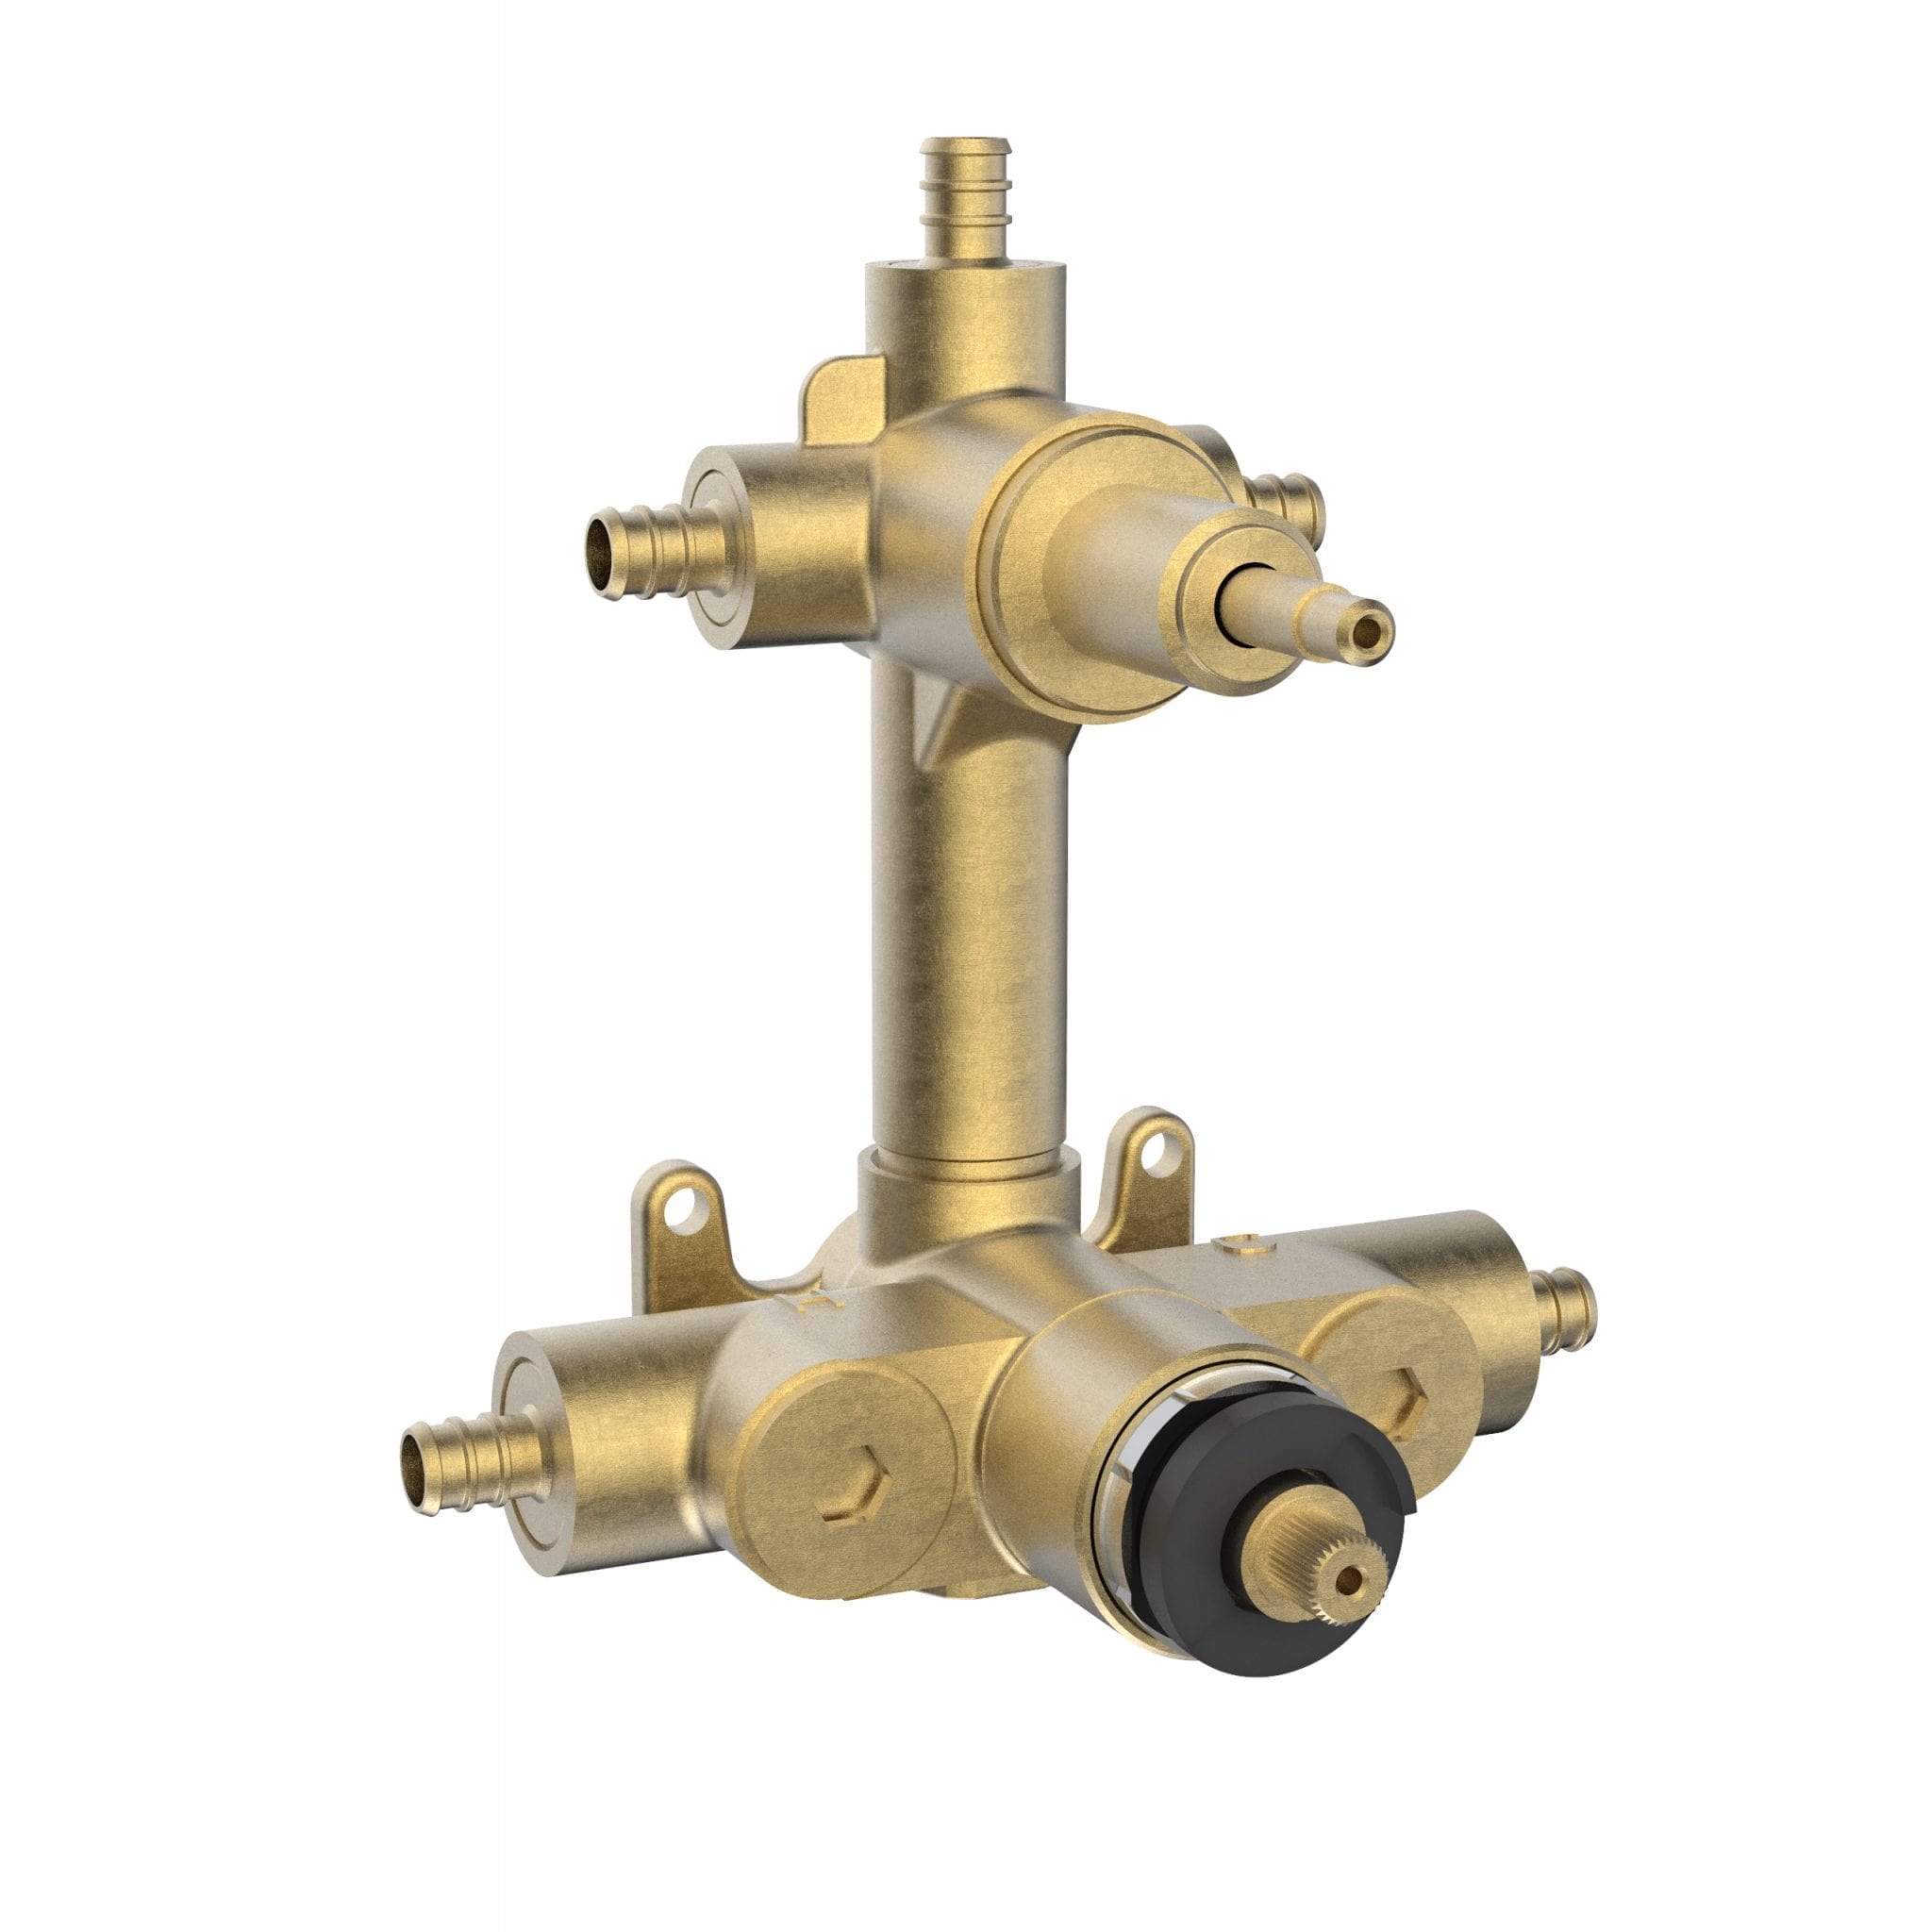 Bélanger 98TSR3PEX- 3-Way Diverter Thermo Valve Rough-In For Pex Connection W/Check Stops